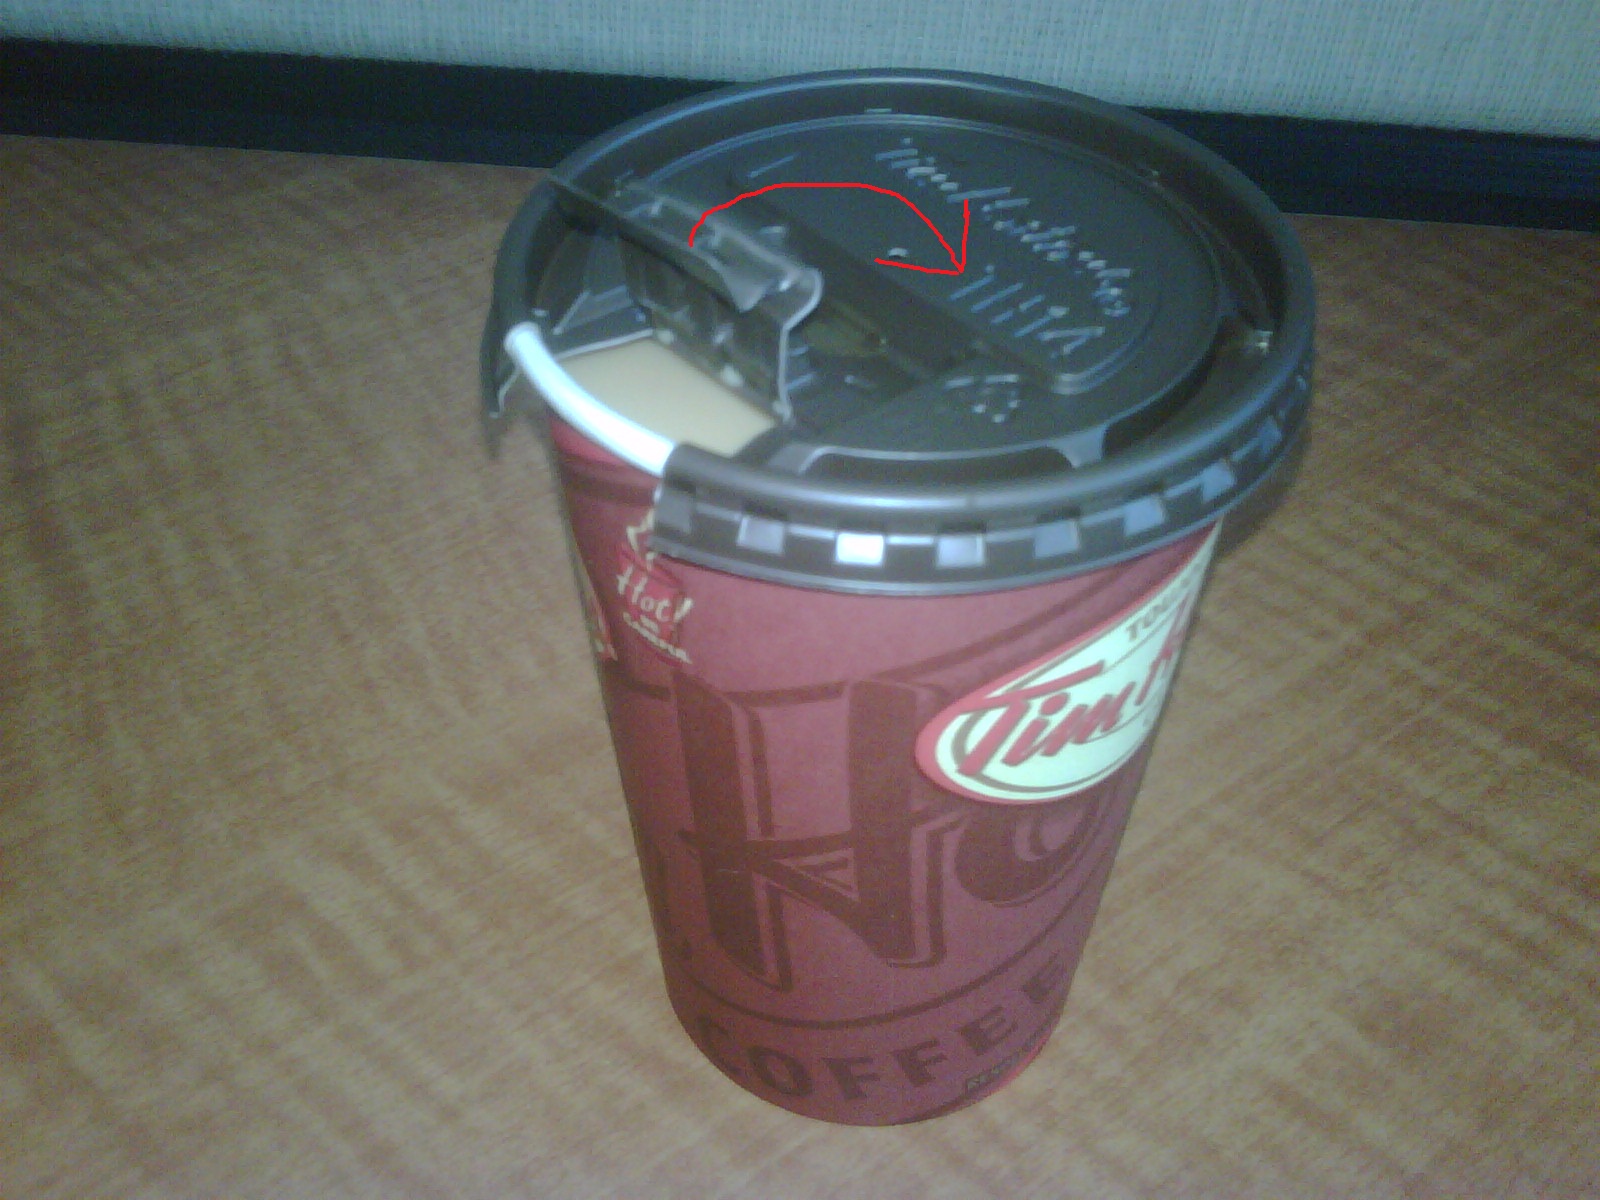 that the coffee cup lid,